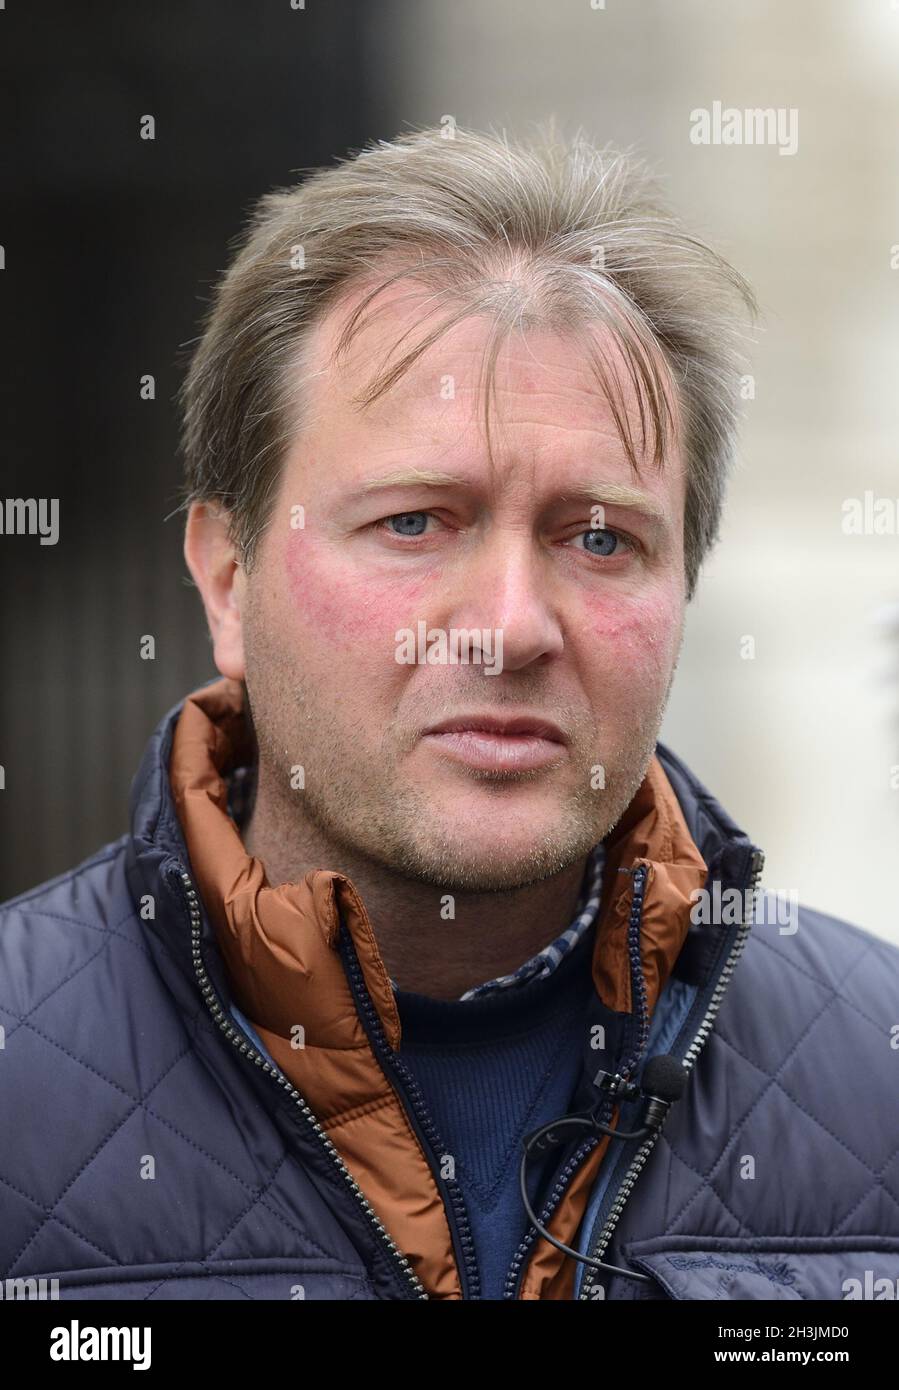 Richard Ratcliffe - husband of Nazanine Zaghari-Ratcliffe, detained in Iran - just before a meeting with Foreign Secretary Liz Truss on the fifth day Stock Photo